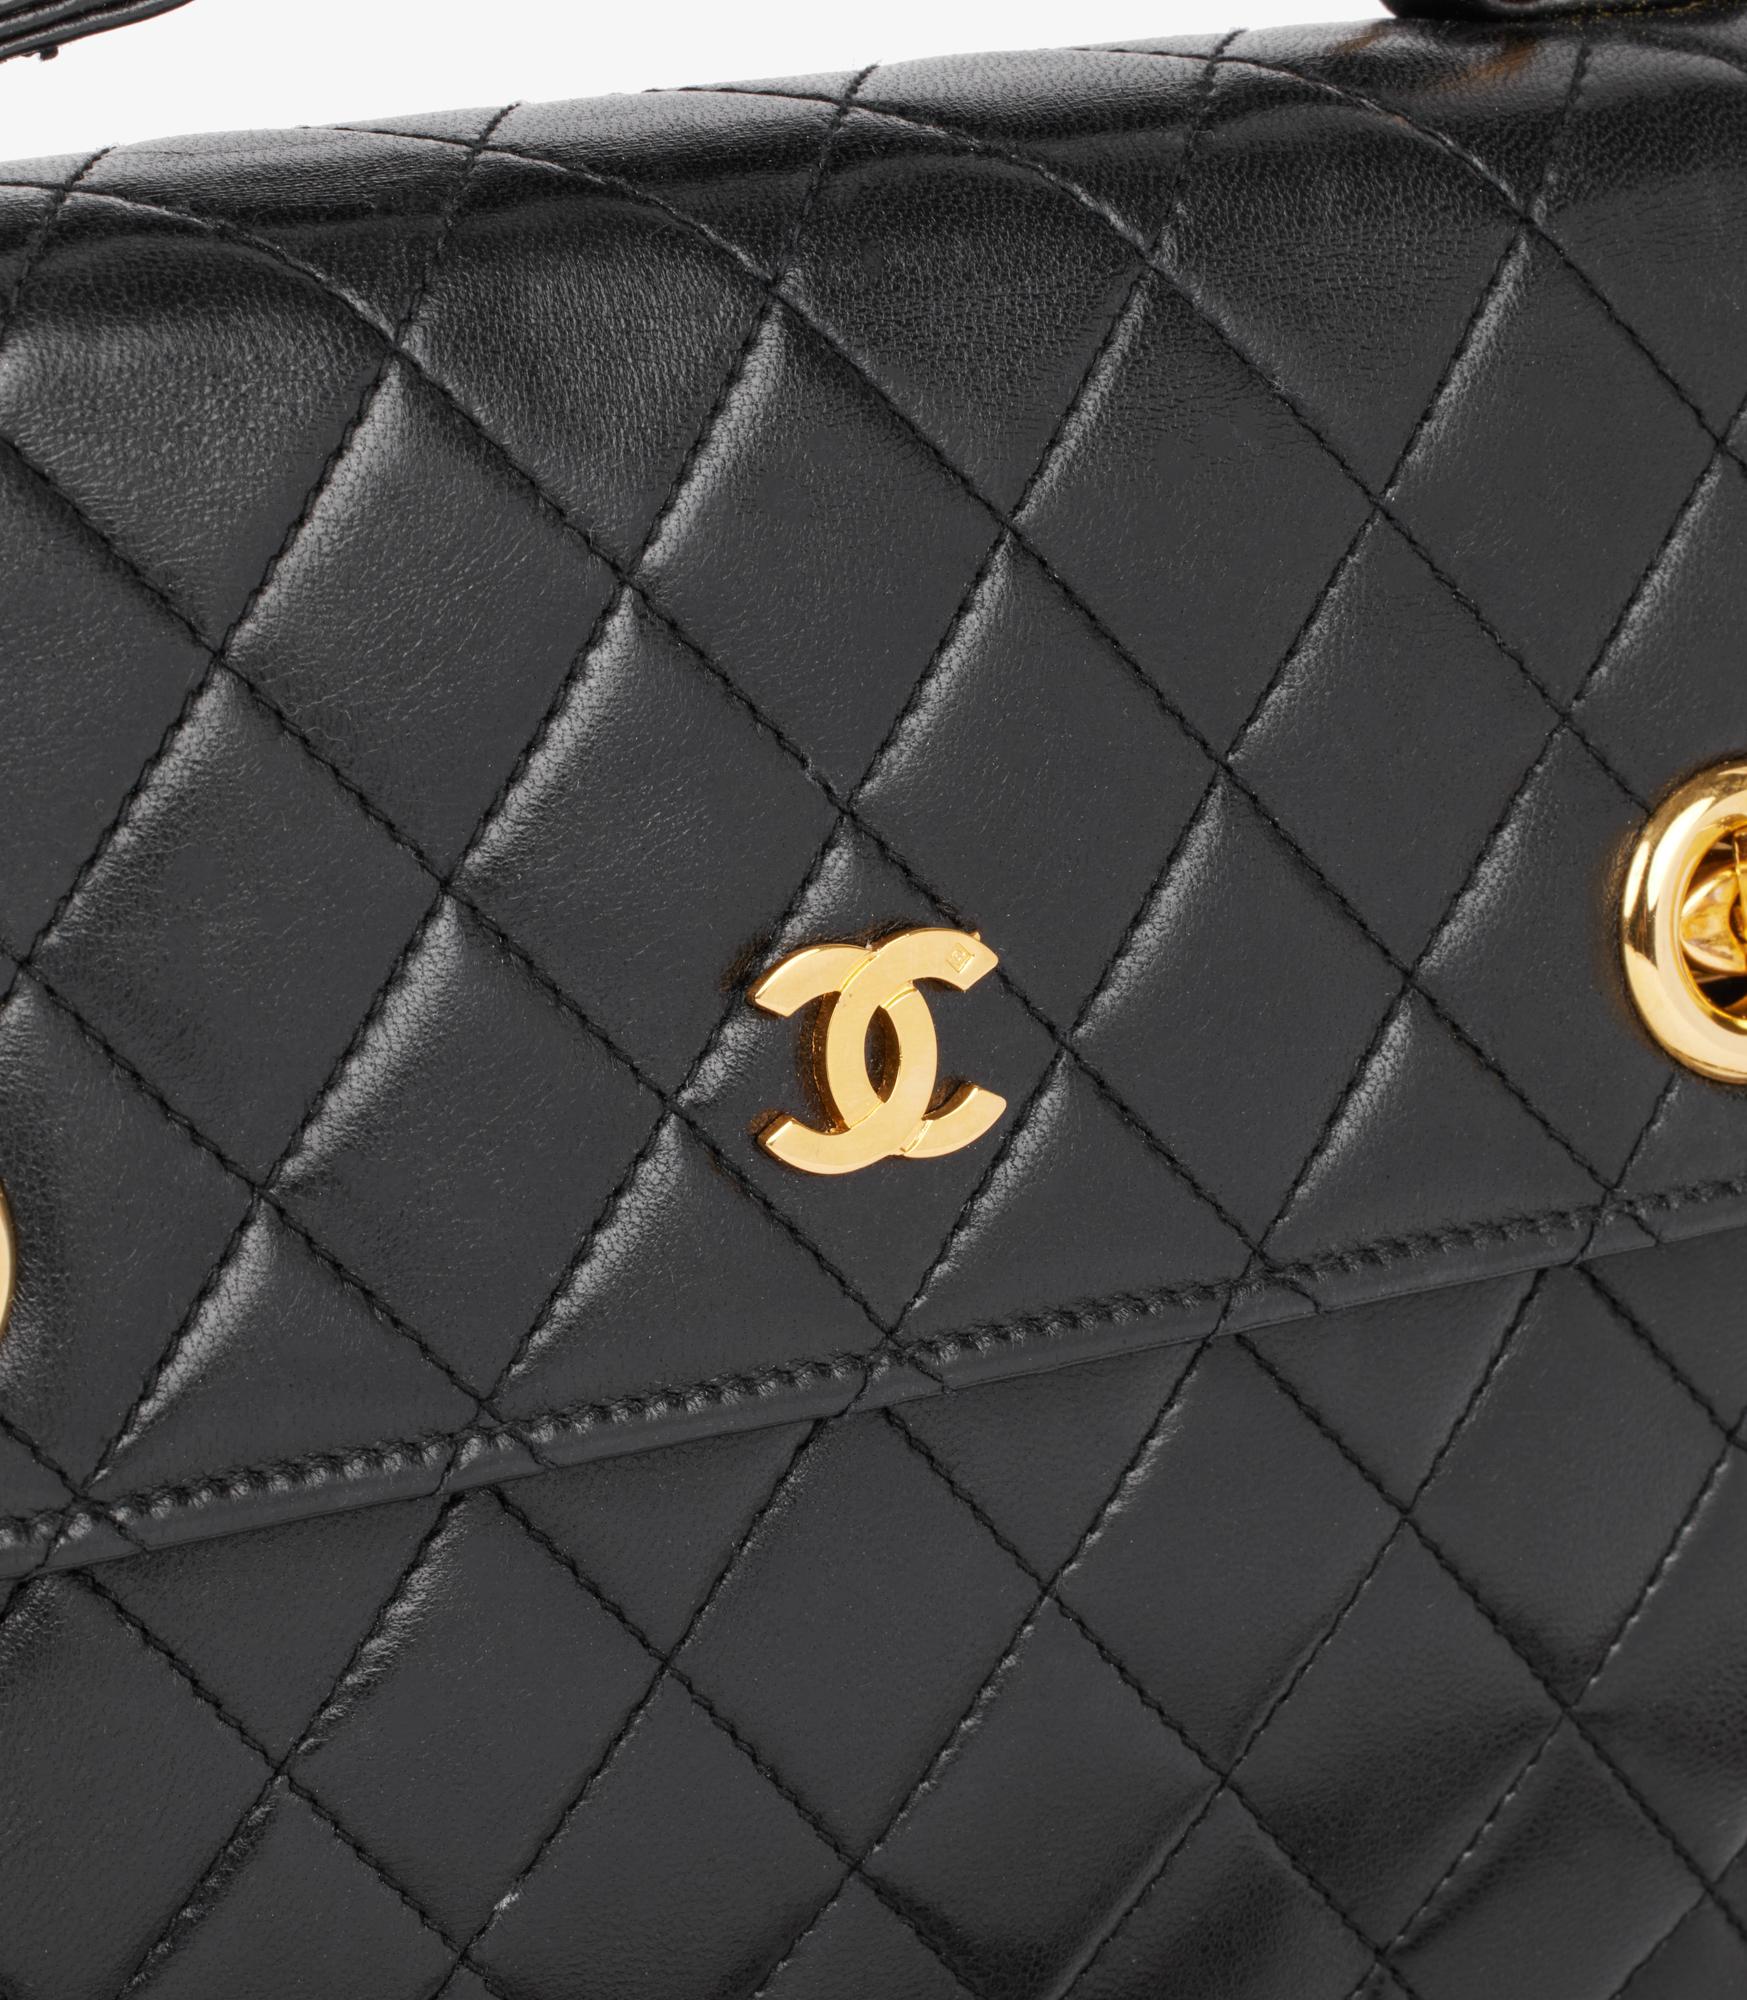 Chanel Black Quilted Lambskin Vintage Small Classic Single Flap Bag With Top Handle

Brand- Chanel
Model- Small Classic Single Flap Bag
Product Type- Shoulder, Top Handle
Serial Number- 377617
Age- Circa 1988
Accompanied By- Chanel Dust Bag,